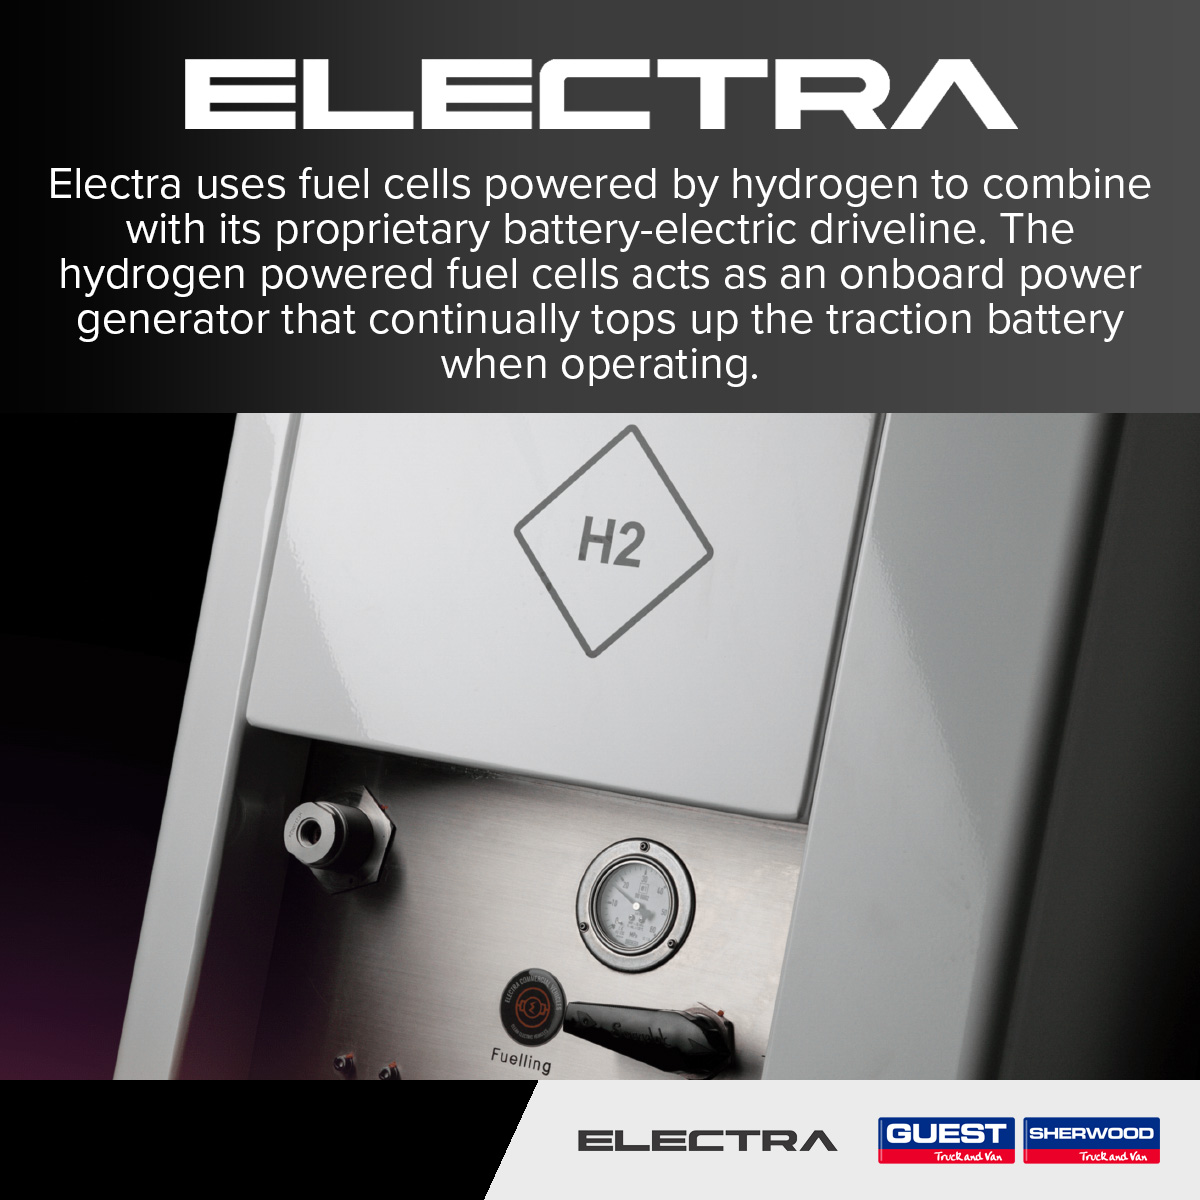 To find out more about Electra Commercial Vehicles, contact our sales team on 0121 553 2737 today!

#electra #electricvehicle #ev #electric #electricvehicles #zeroemissions #emobility #gogreen #ecofriendly #goelectric #fleet #commercialvehicles #sustainability